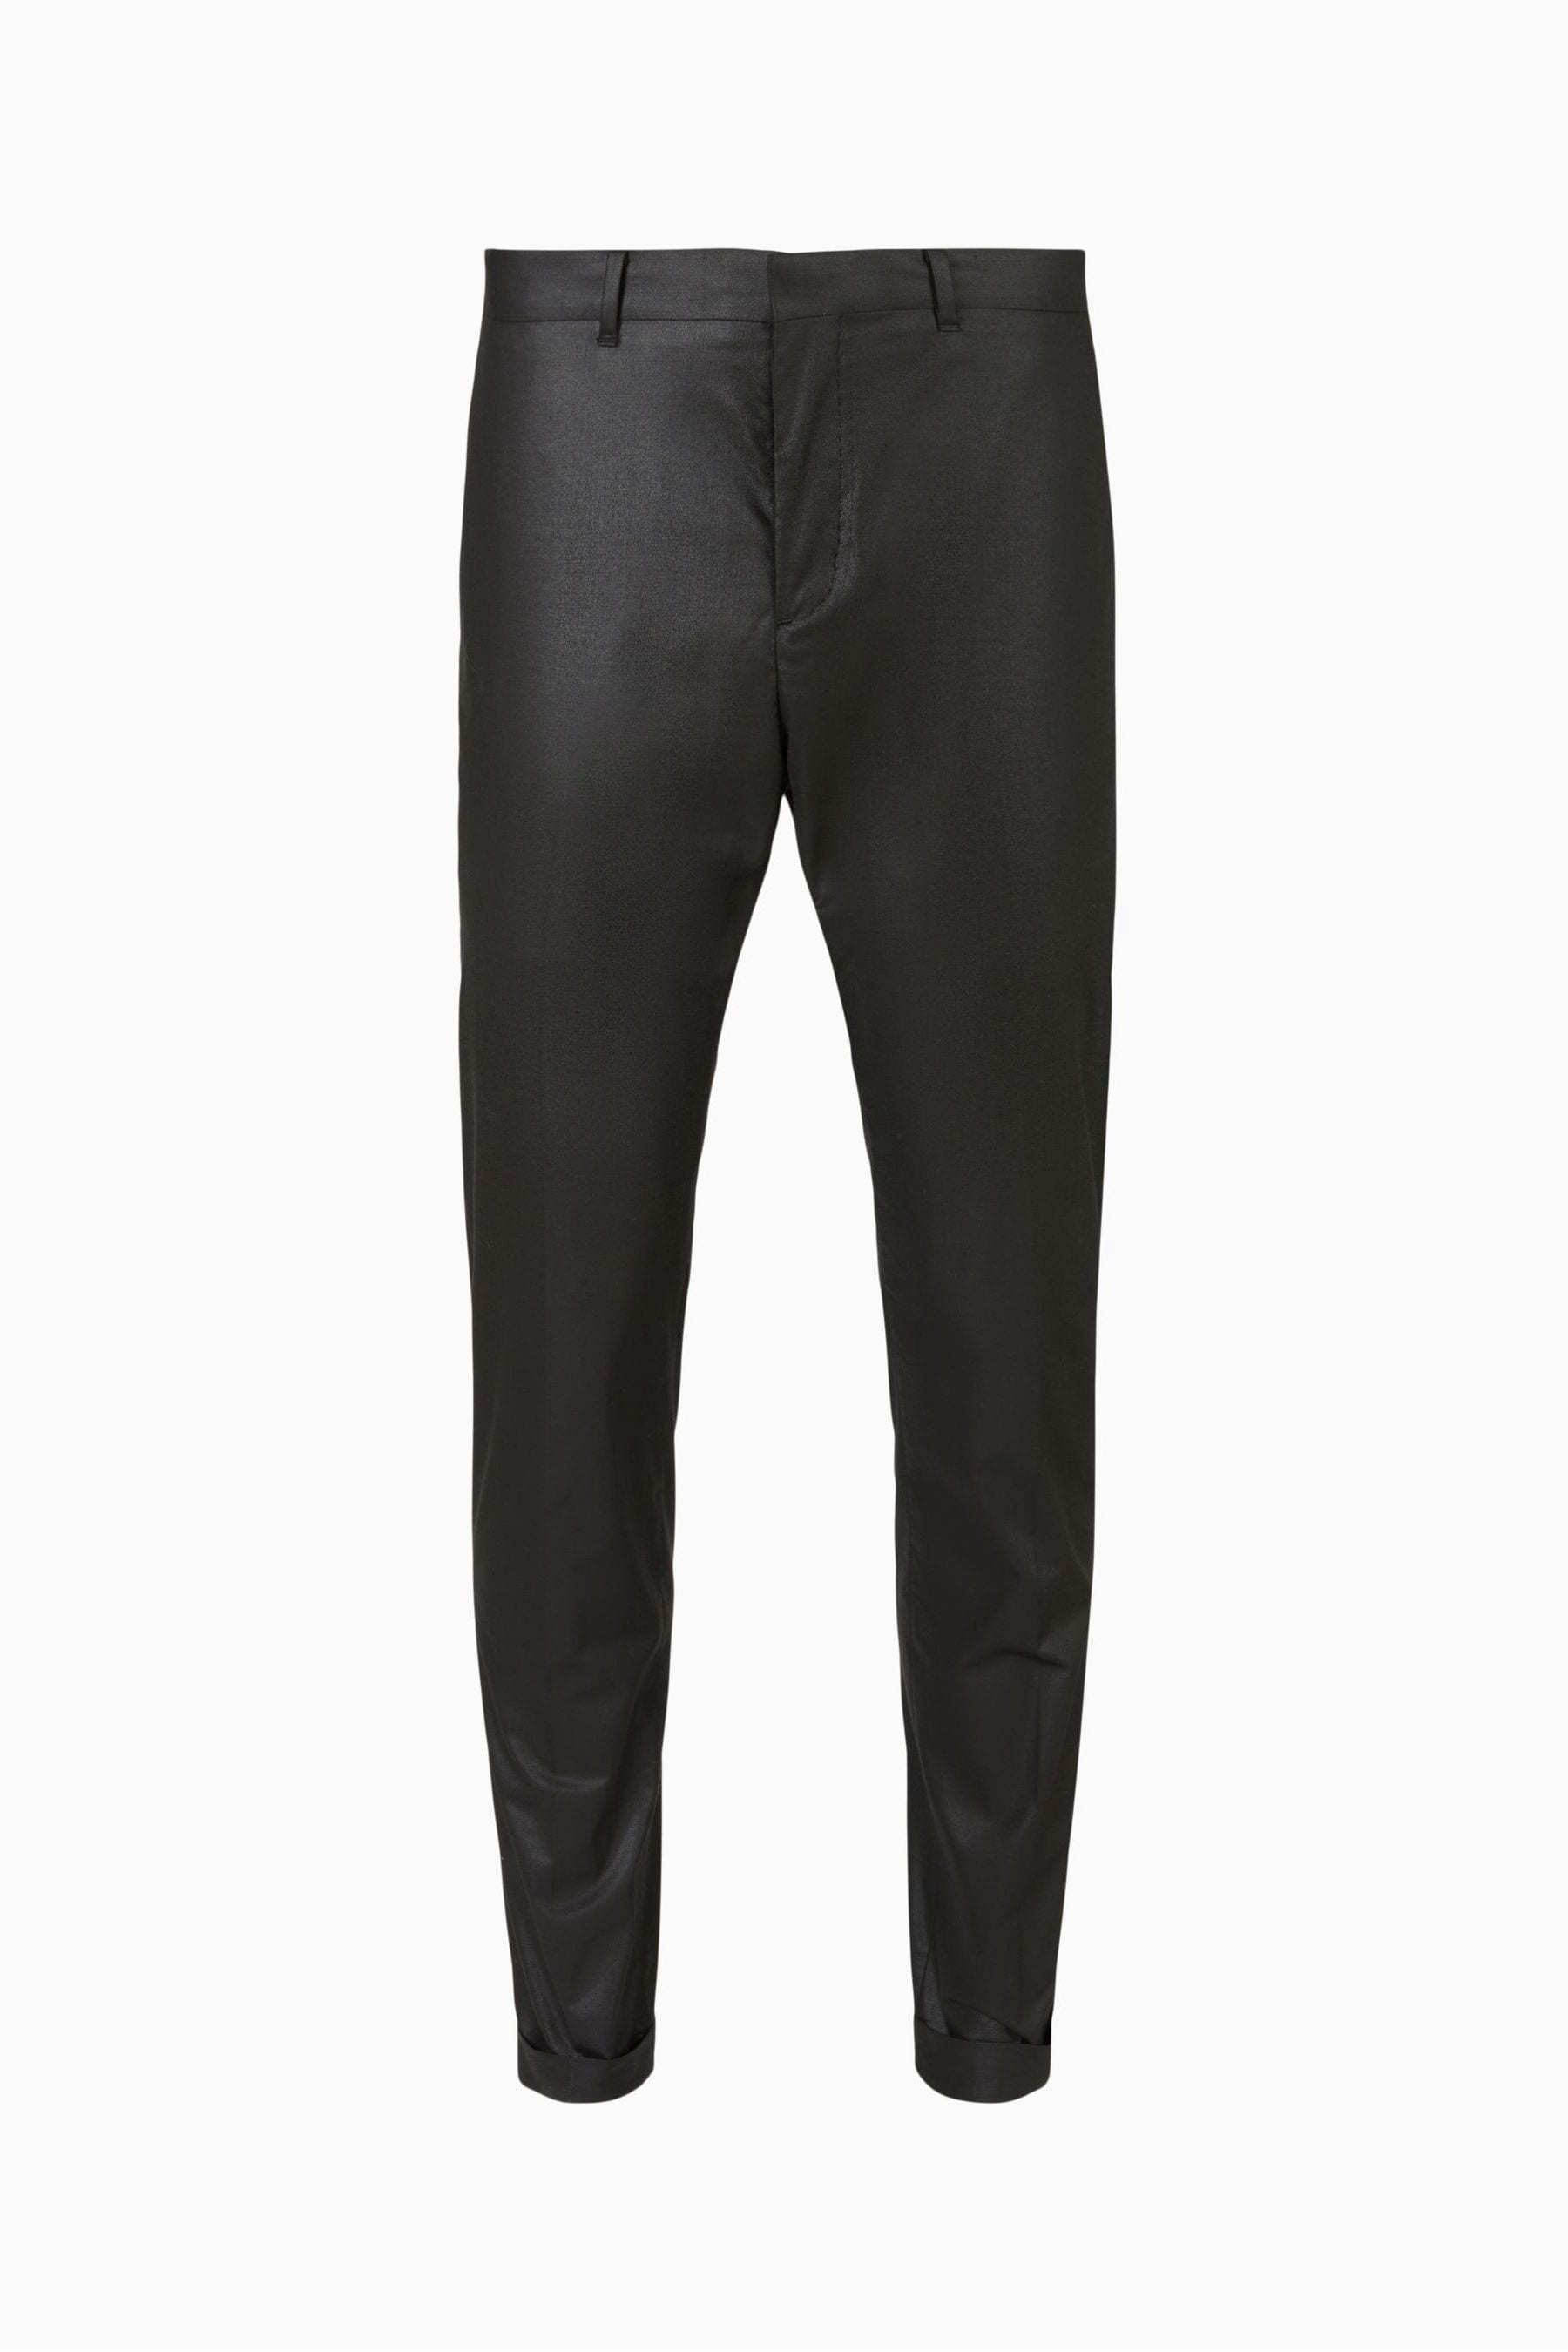 Buy All Saints Trade Black Trousers from the Next UK online shop